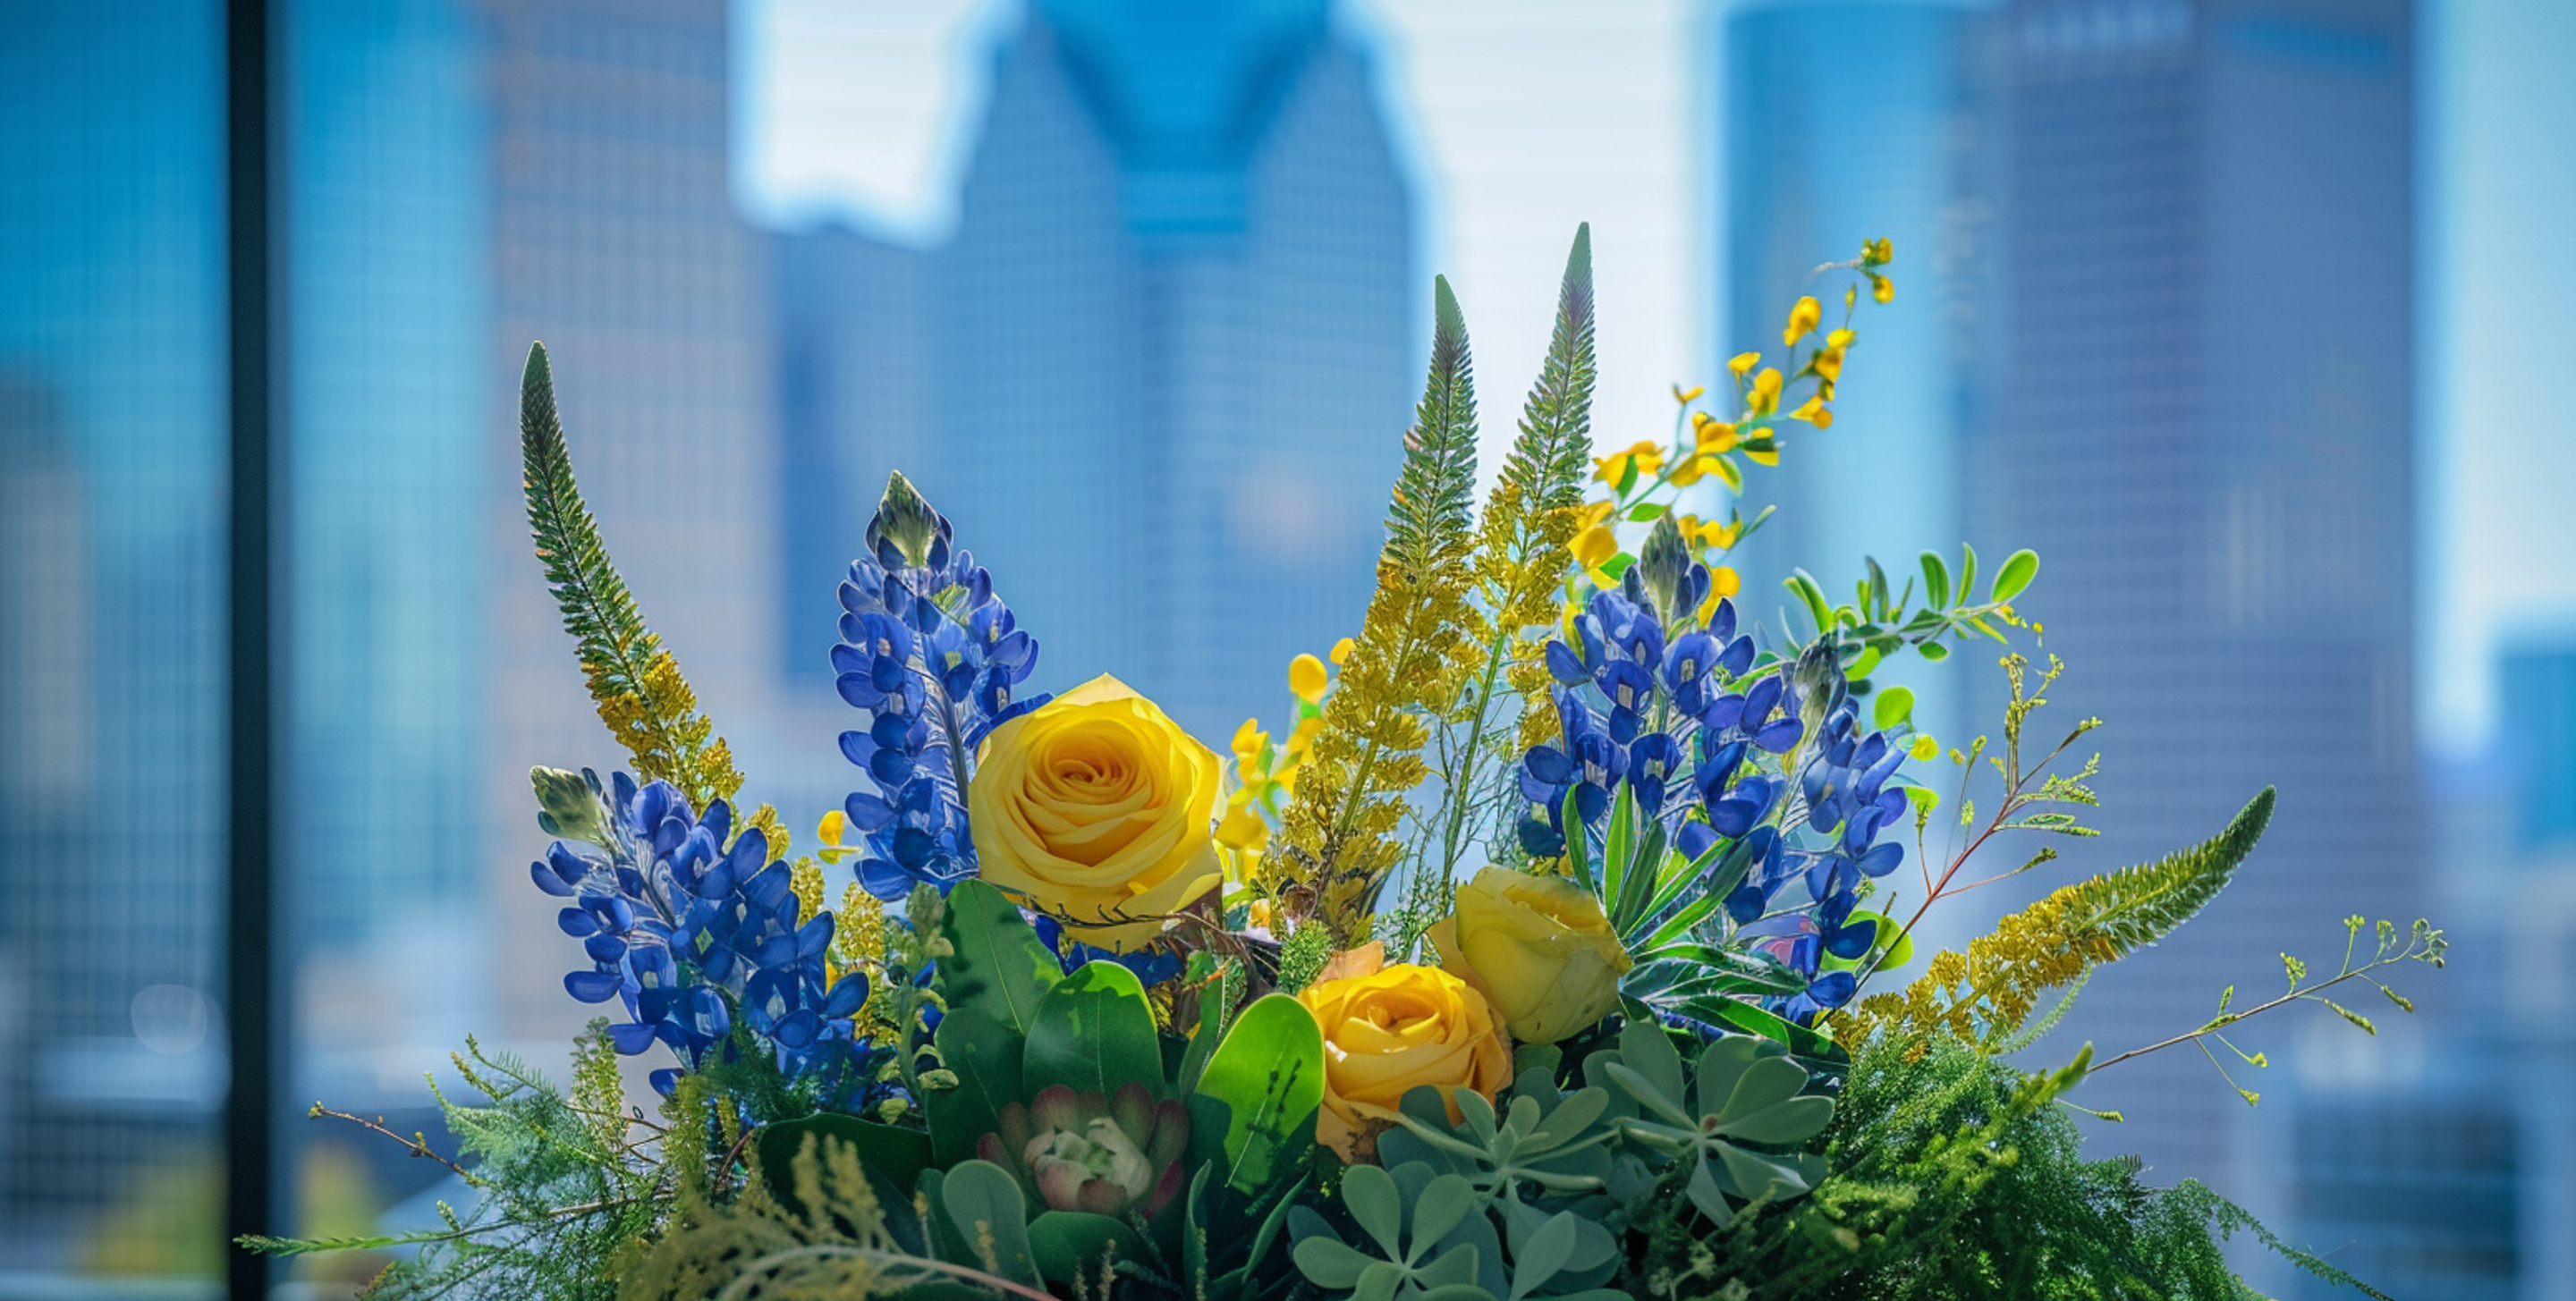 Close up flower arrangement featuring yellow roses and bluebonnets. The Houston skyline seen through an office window blurred in the background.